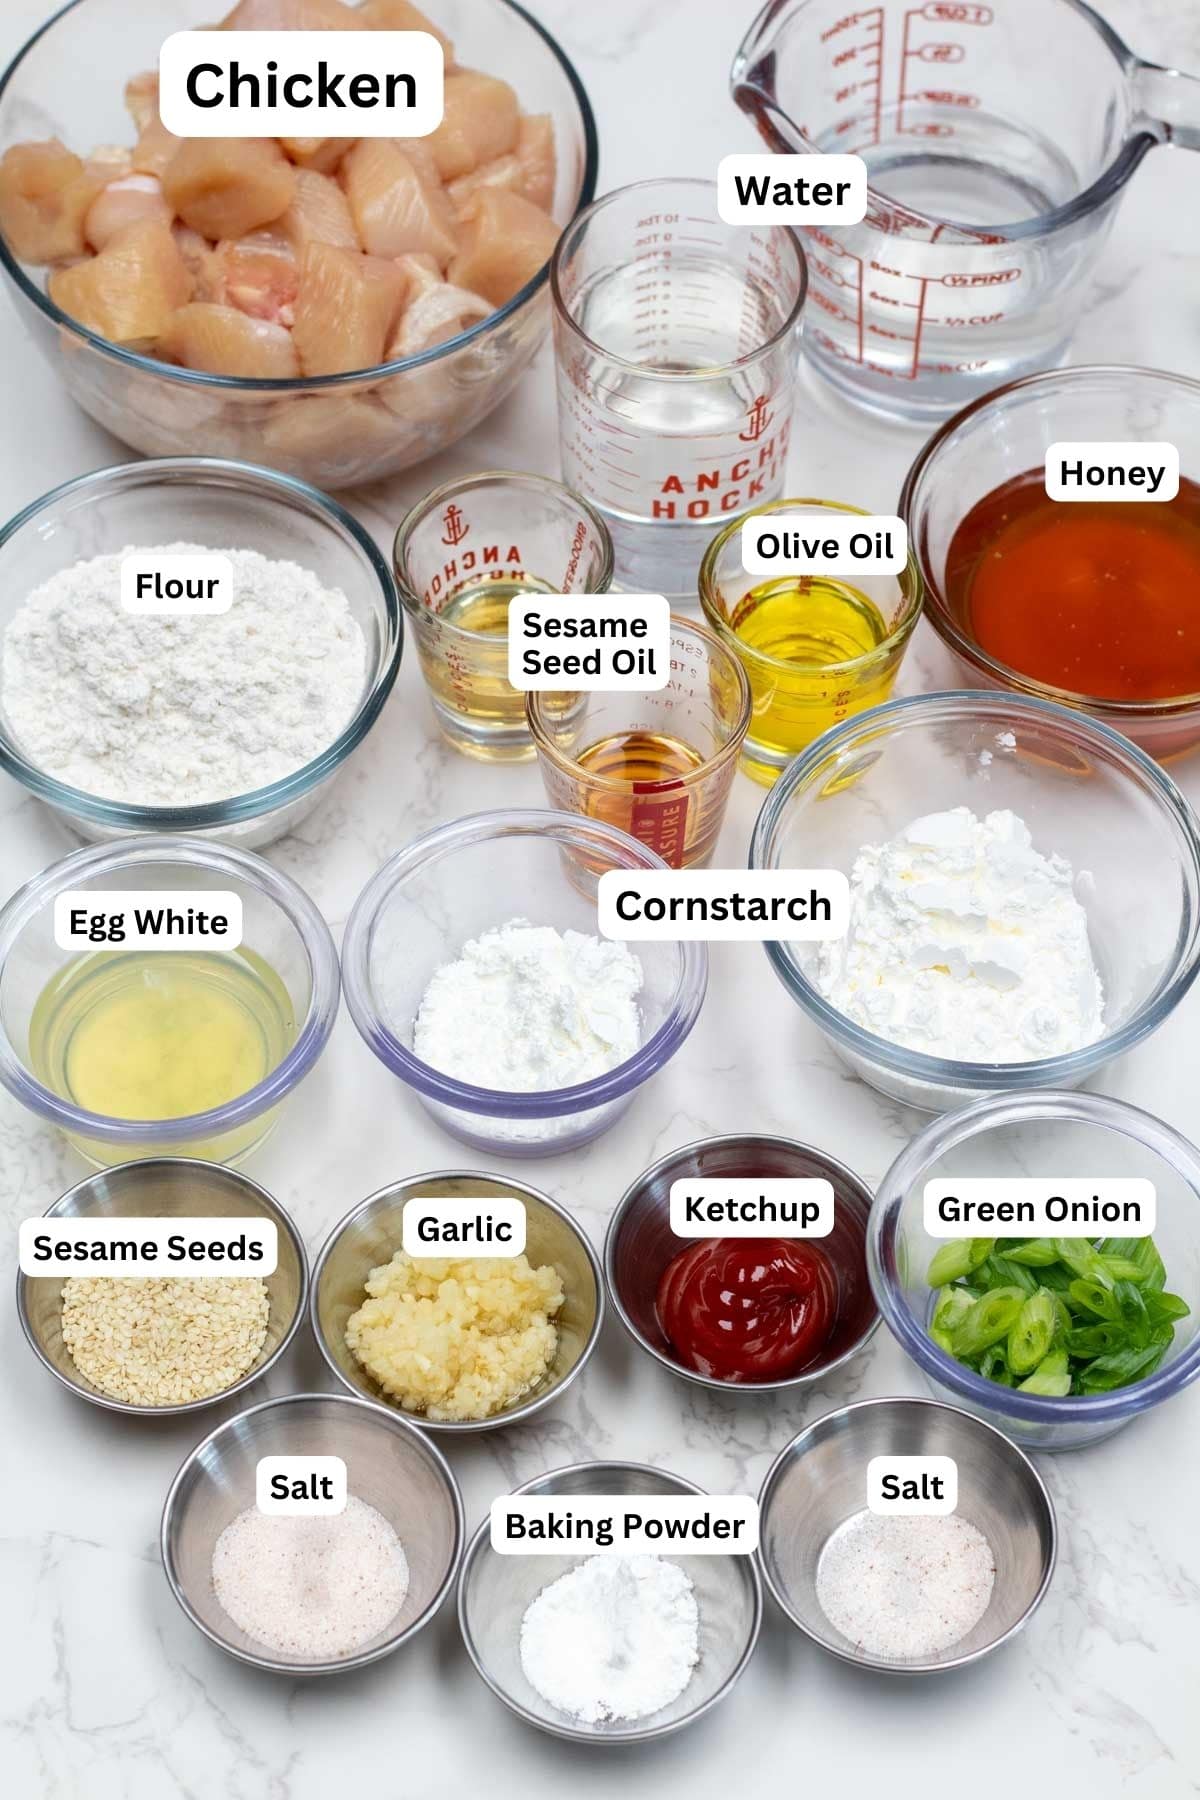 Tall image showing sesame chicken ingredients with labels.